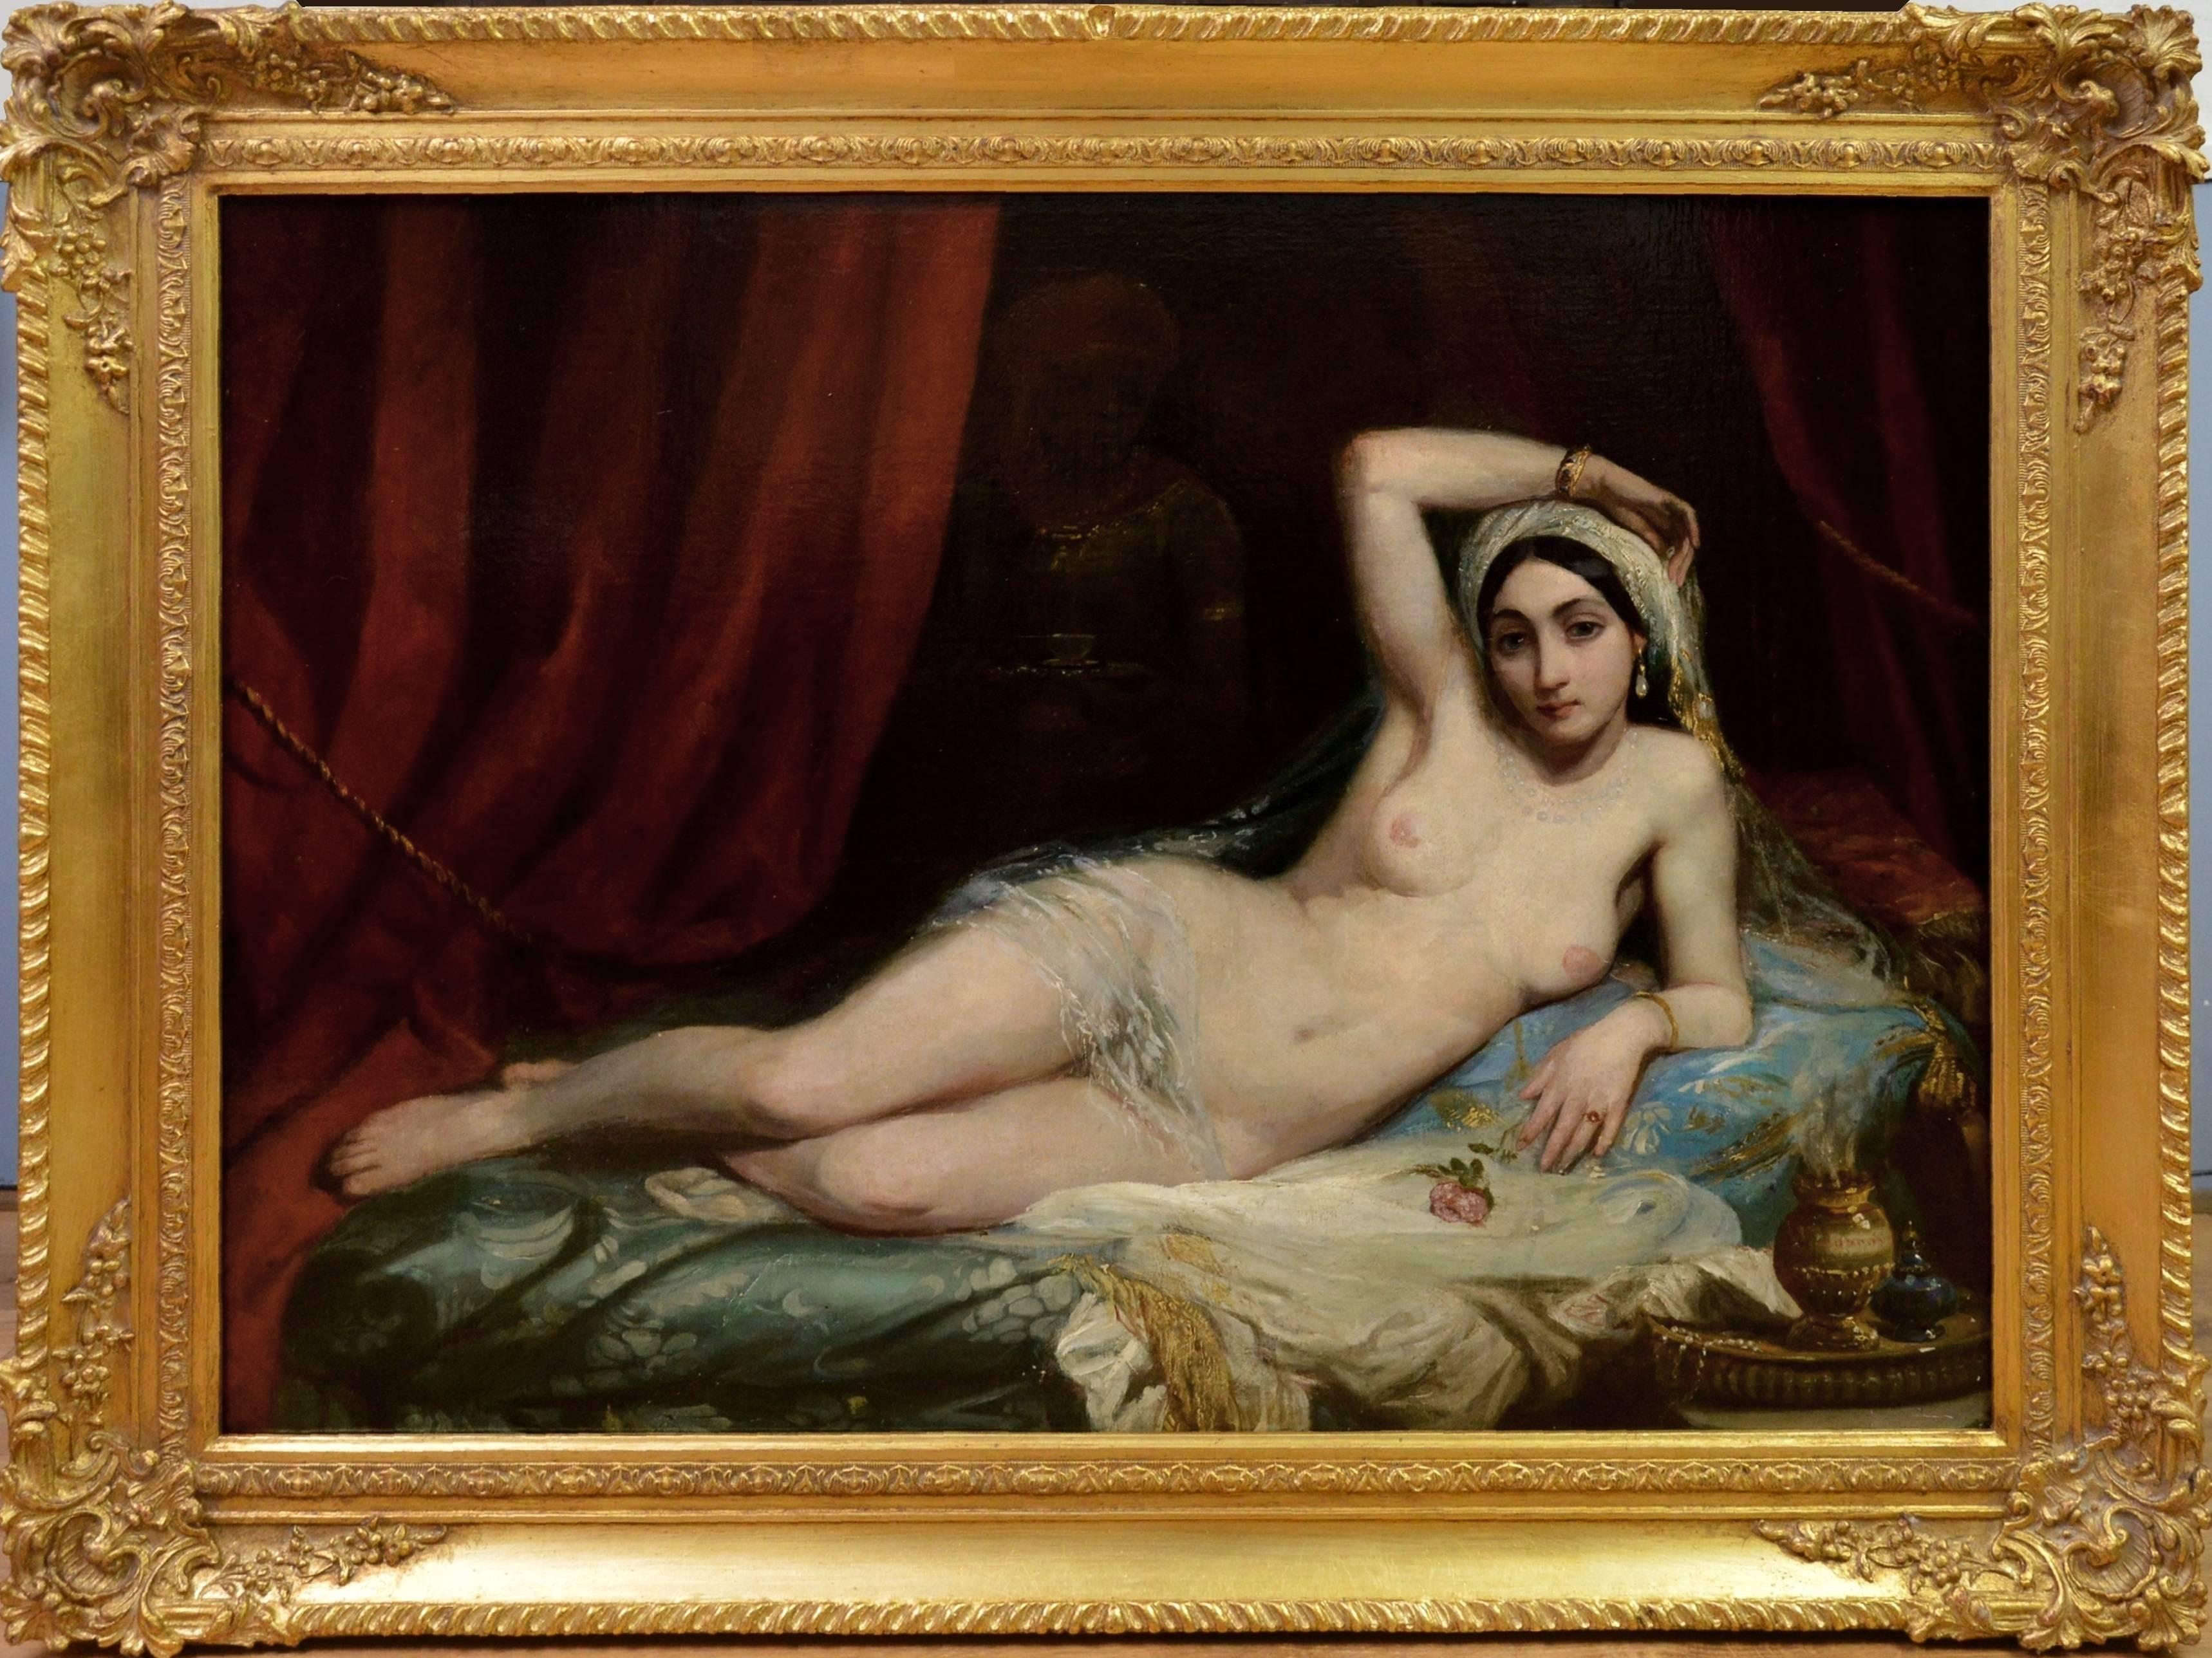 Adrien-Henri Tanoux Nude Painting - Une Odalisque - 19th Century French Orientalist Nude Oil Painting - Harem Girl